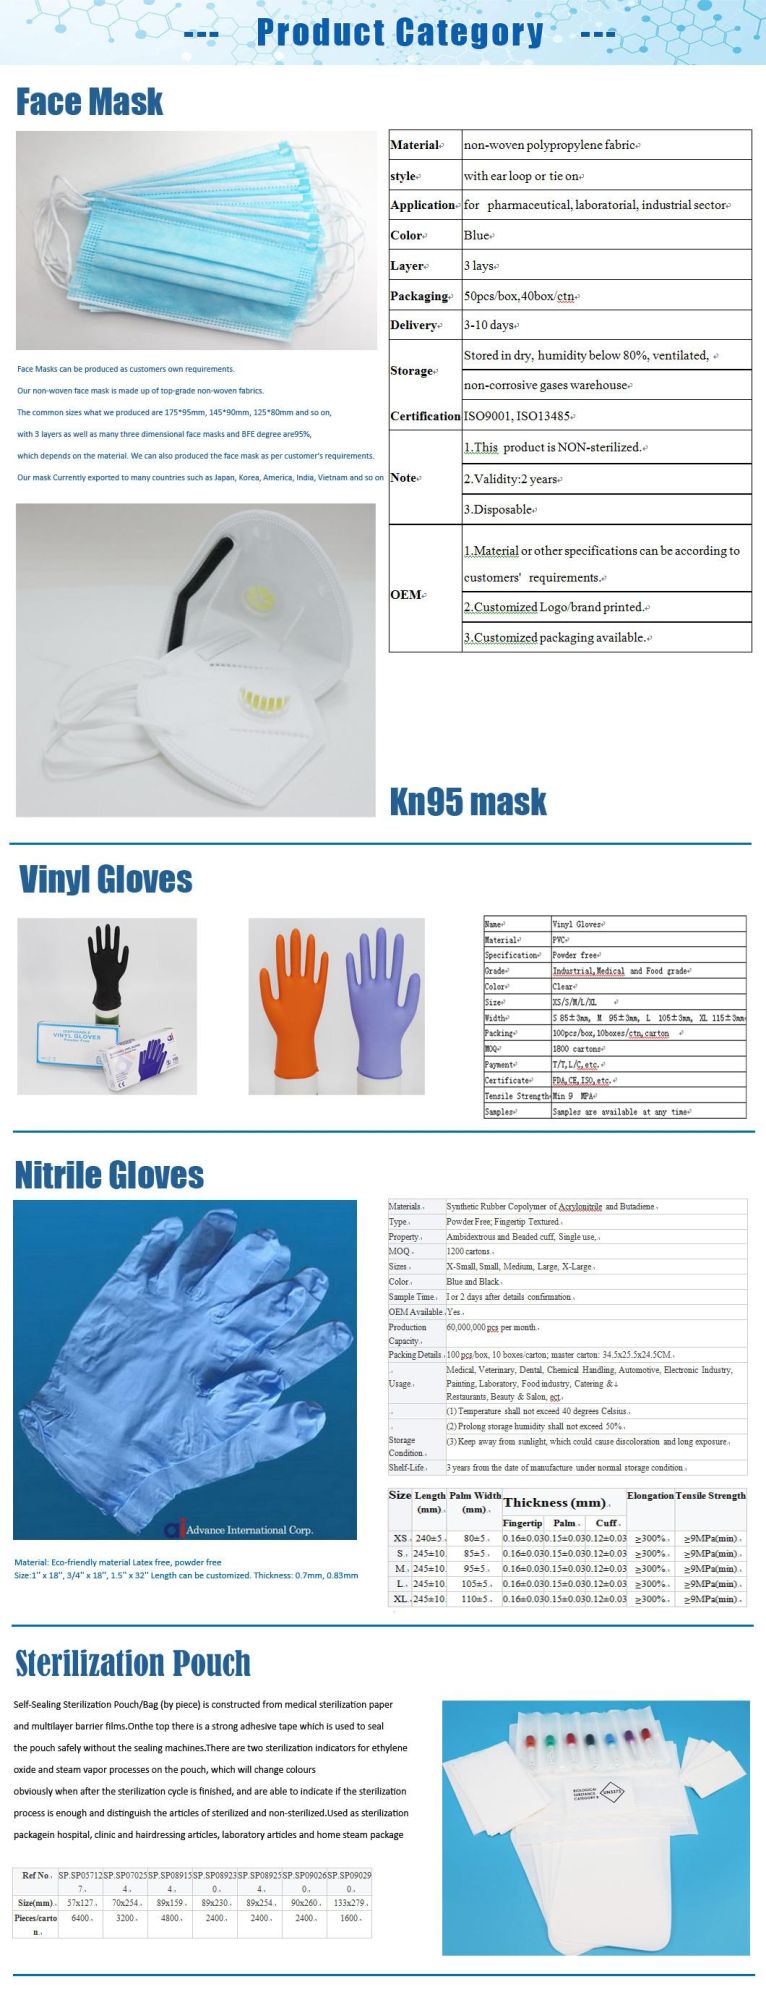 Clear and Blue Powder/Powder Free Disposable Medical Vinyl Gloves (IS certificated)